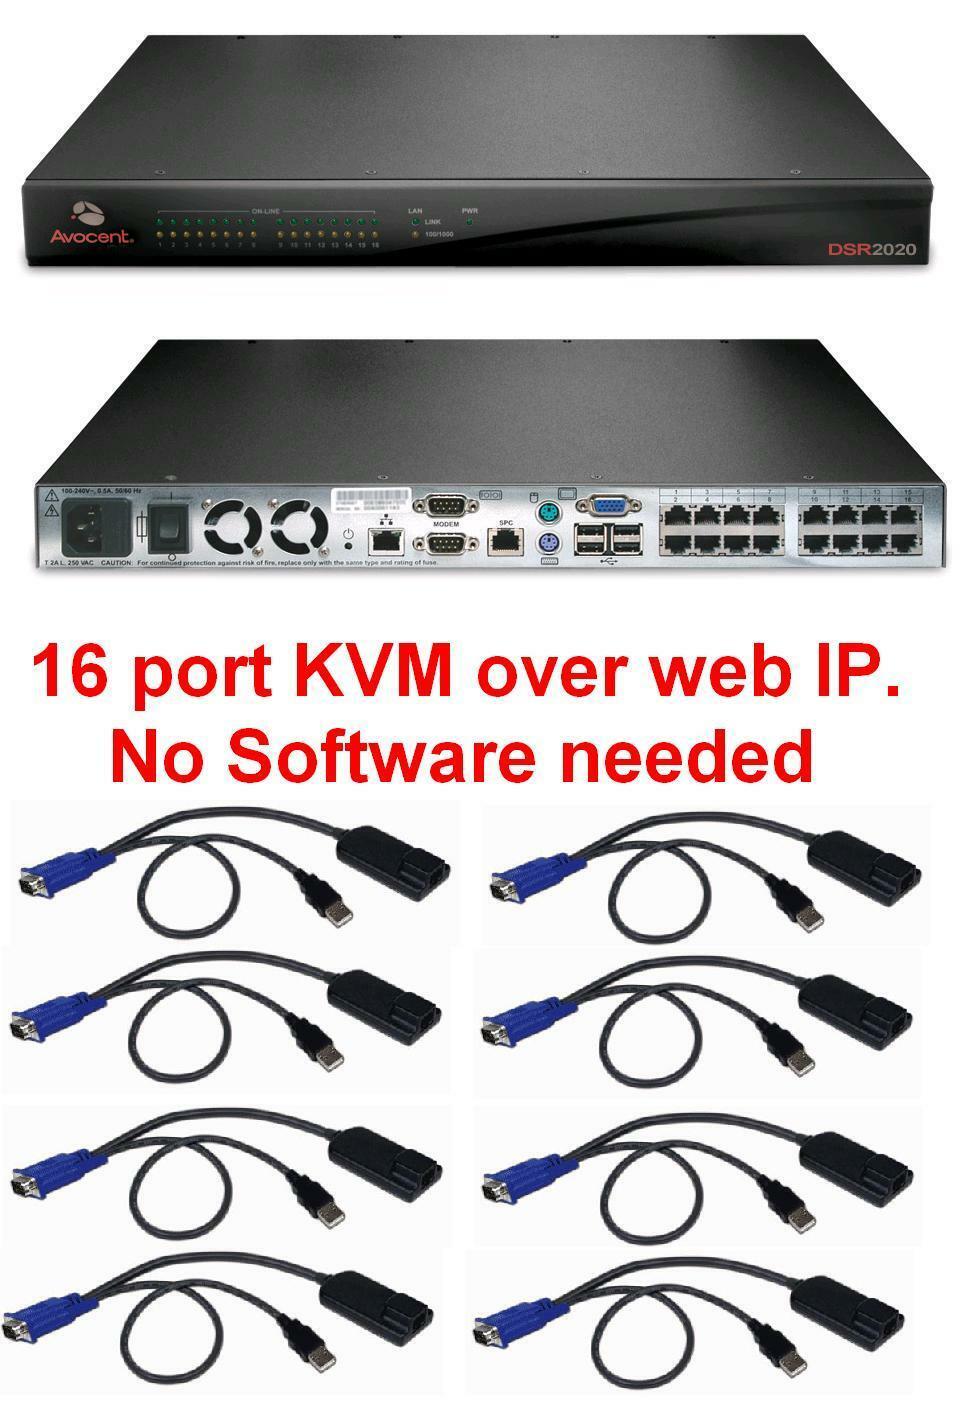 Avocent Dsr2020 16 Port Kvm Over Ip Switch Tested + 8 X Dsriq-usb Cable Modules